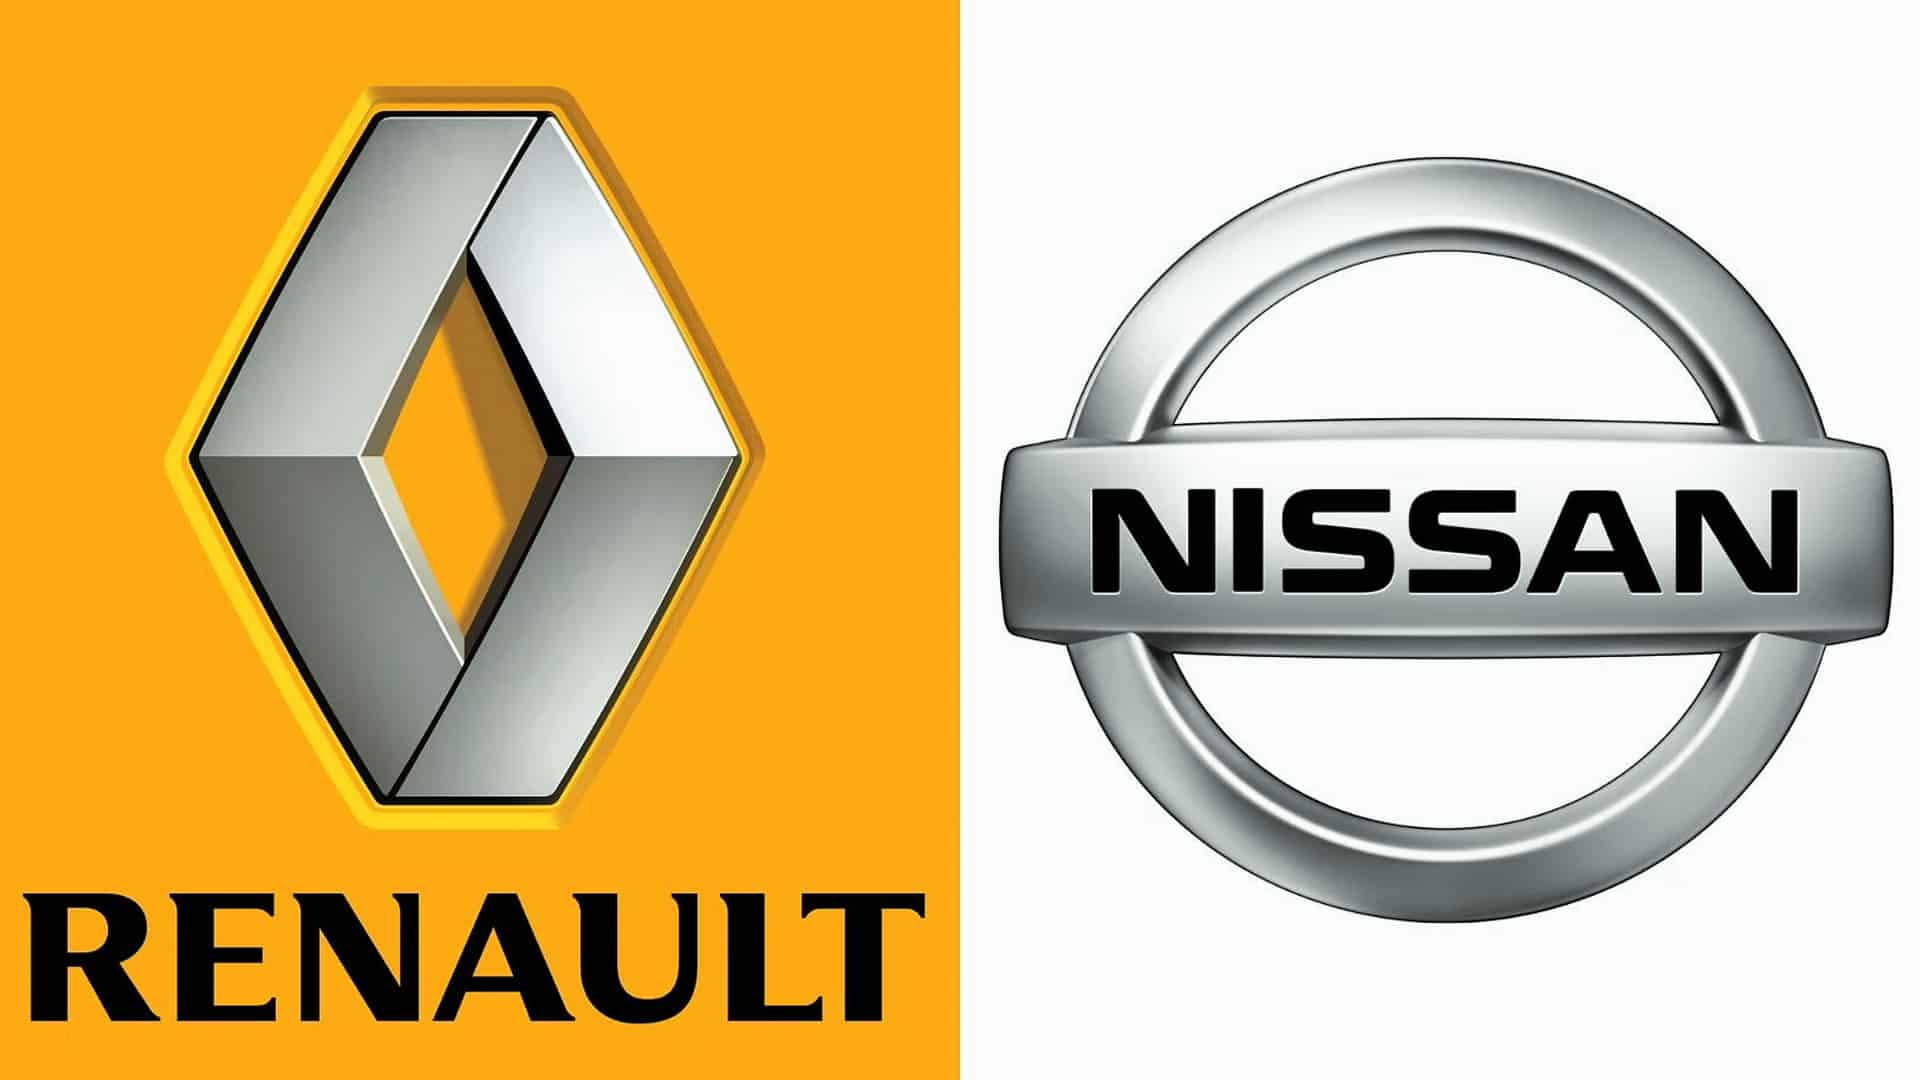 Renault-Nissan commit Rs 5,300 crore investments in TN, to roll out 6 new models including EVs